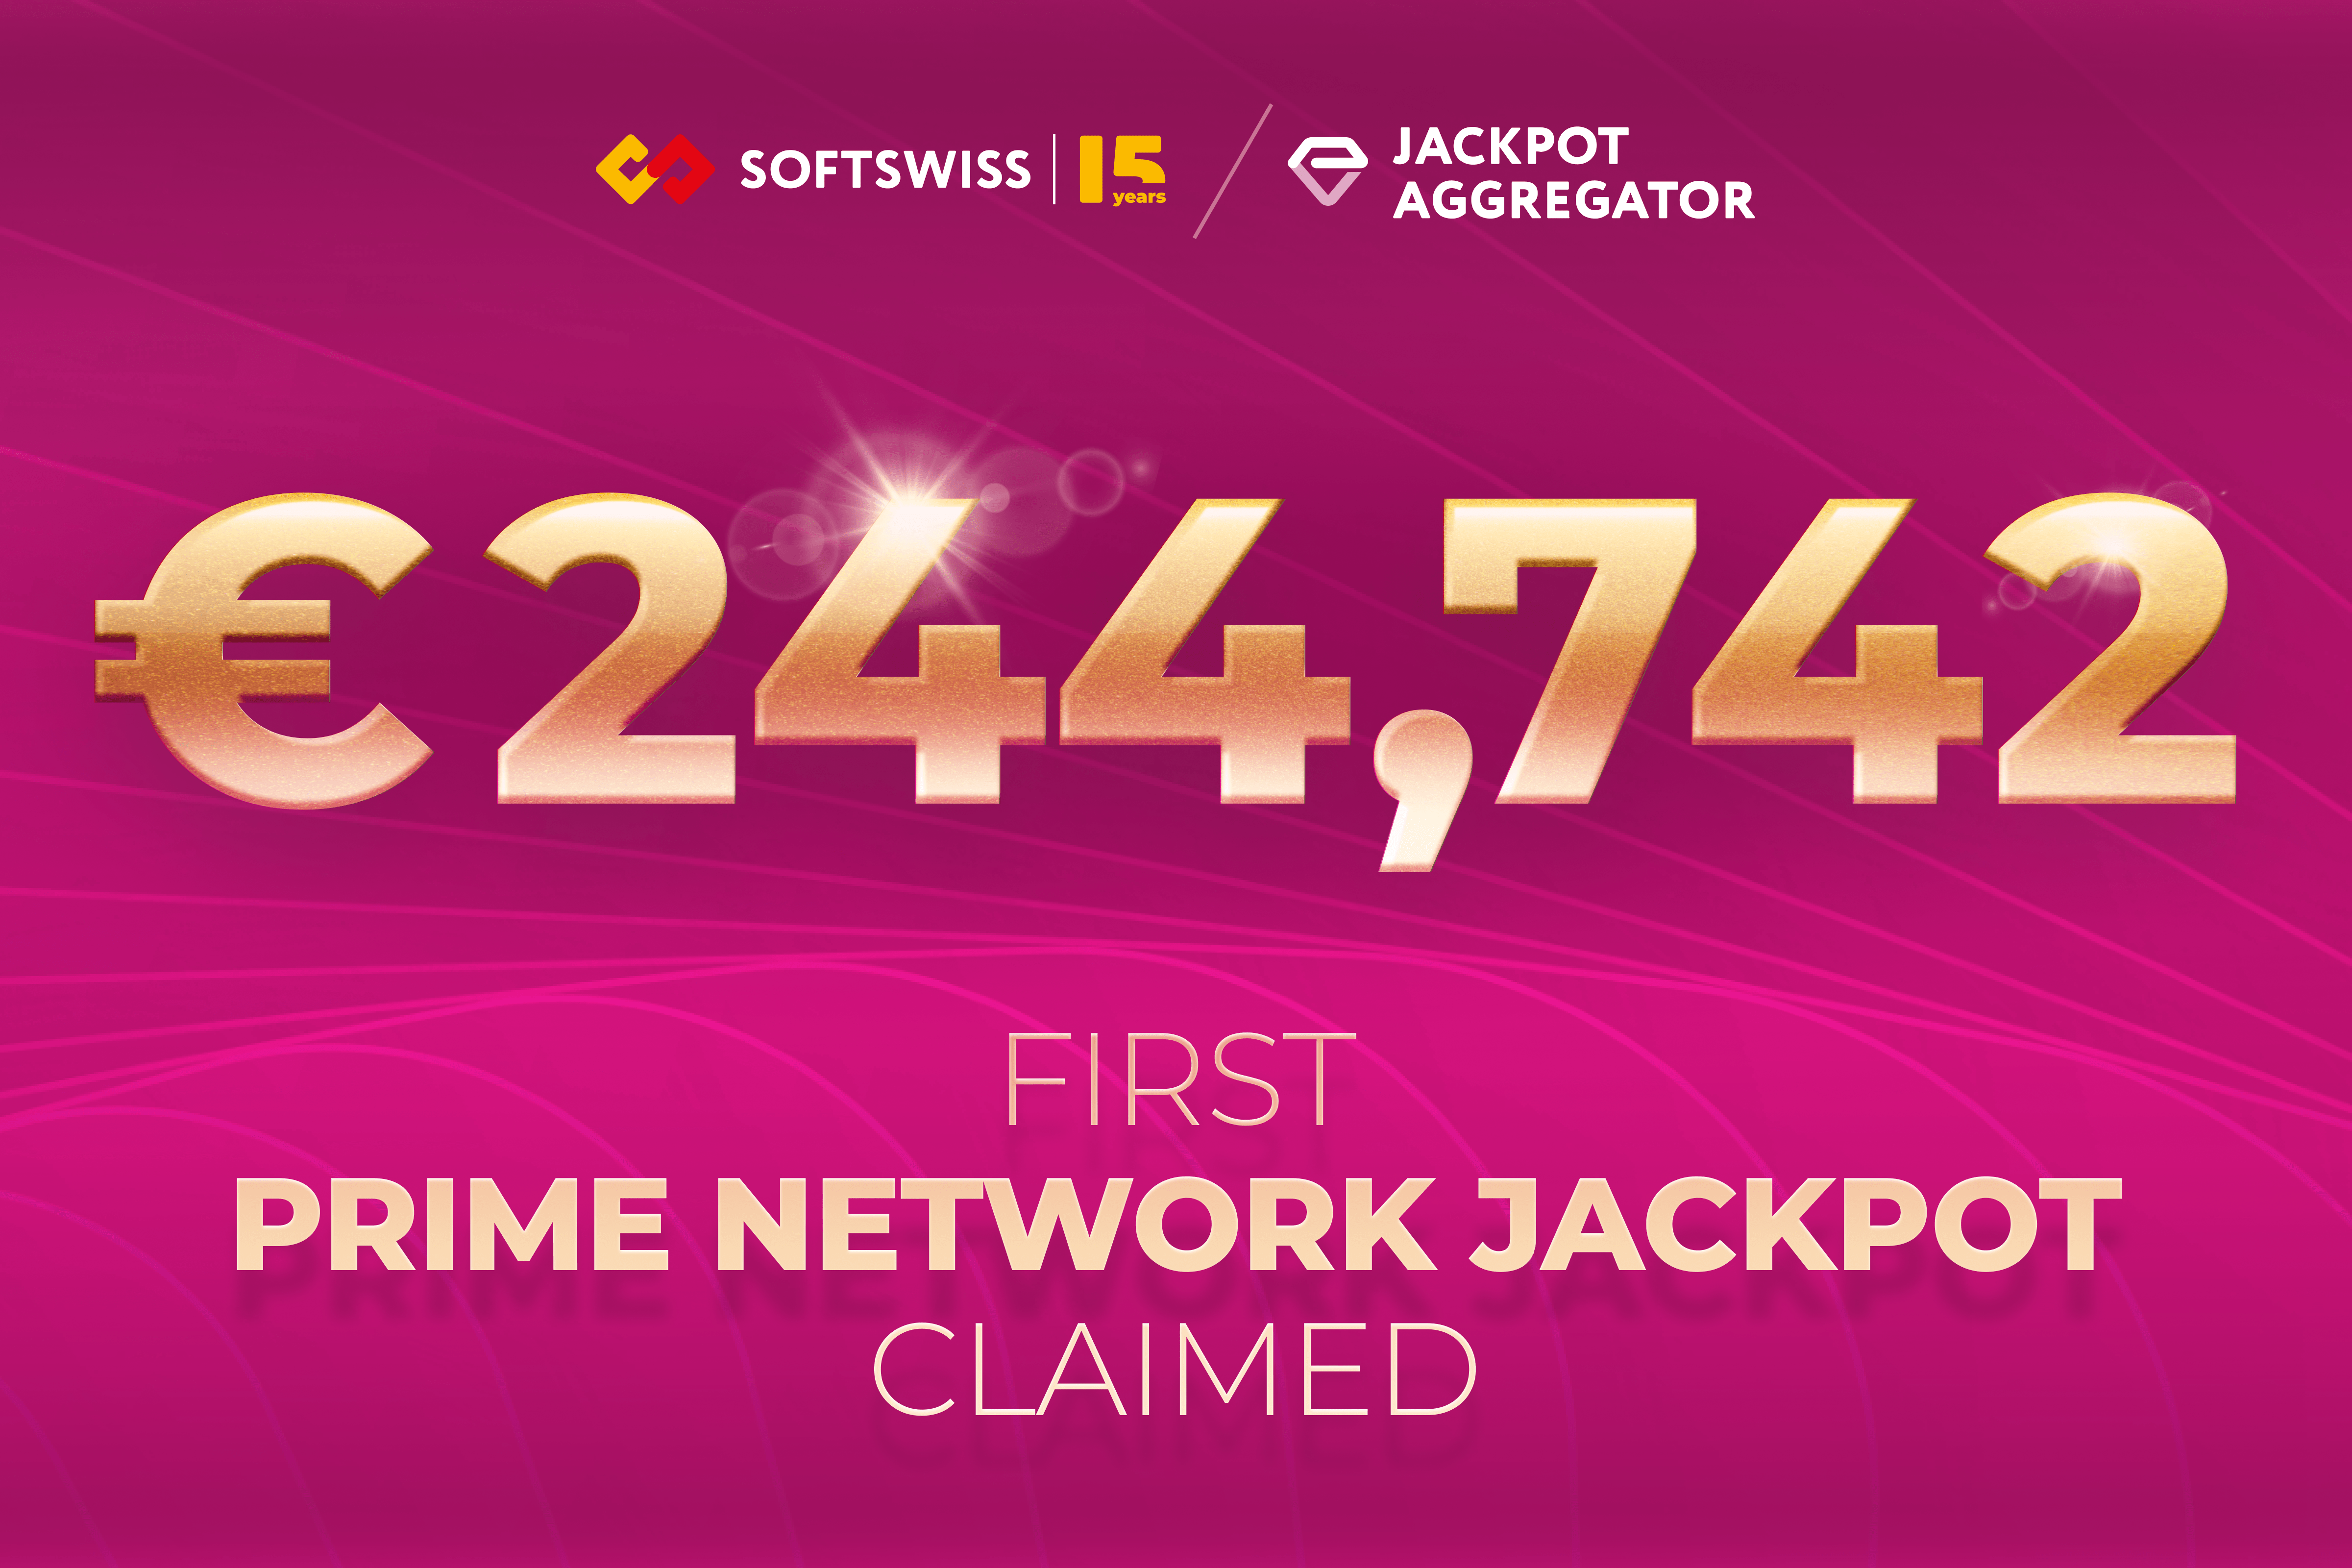 first-softswiss-prime-network-jackpot-strikes-e244k+